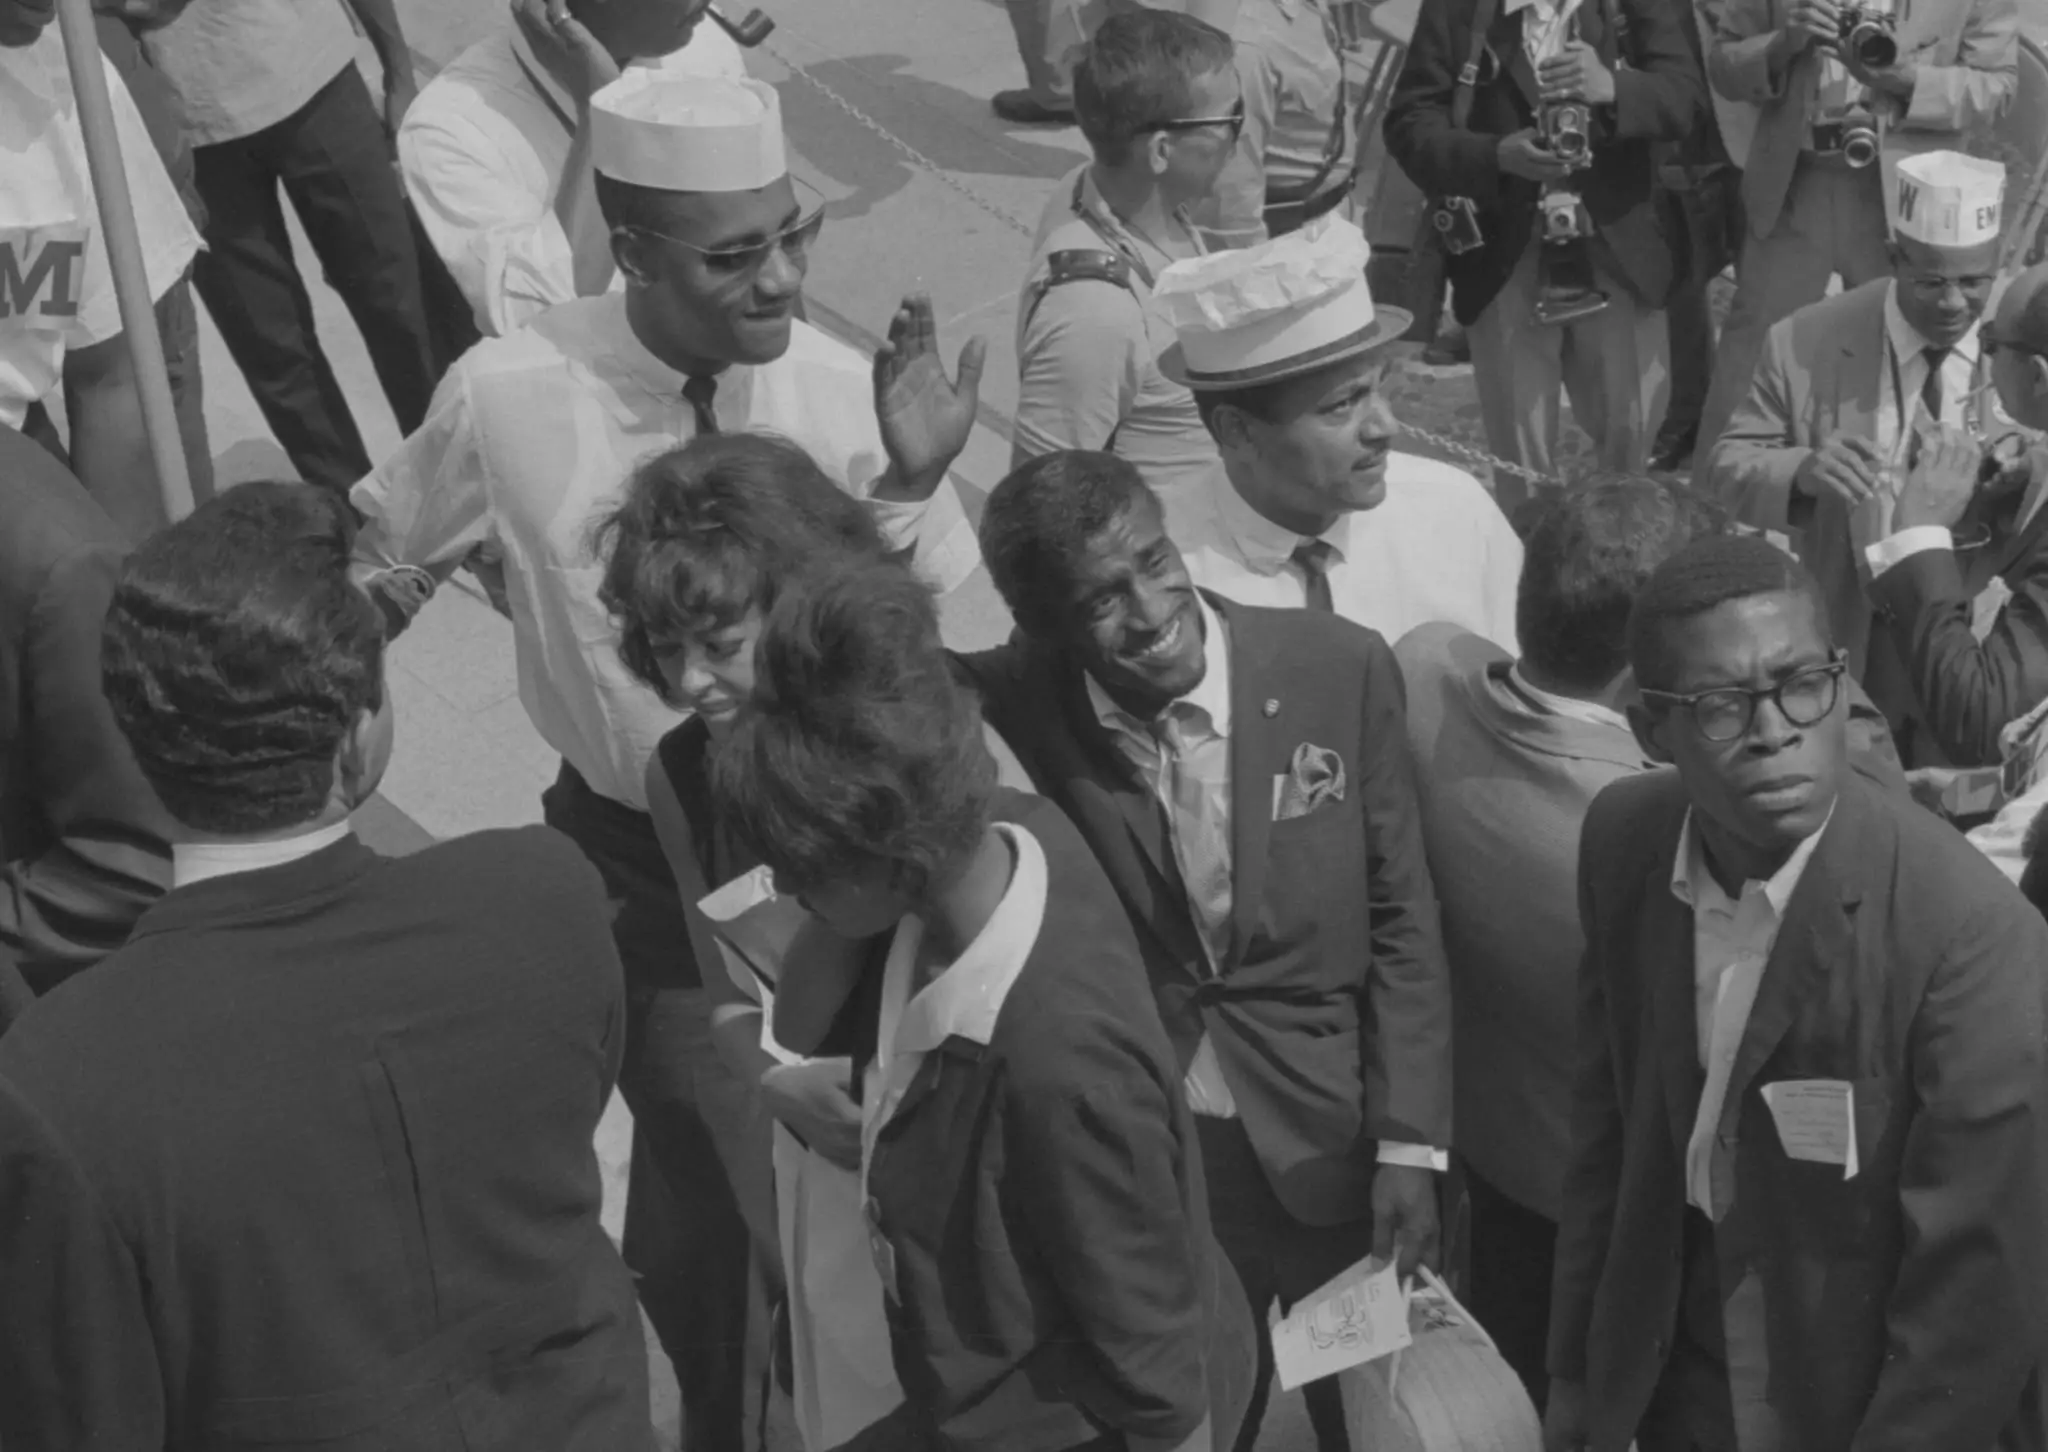 Sammy Davis, Jr., waving to people as he walks past marshals at the Lincoln Memorial during the March on Washington, 1963